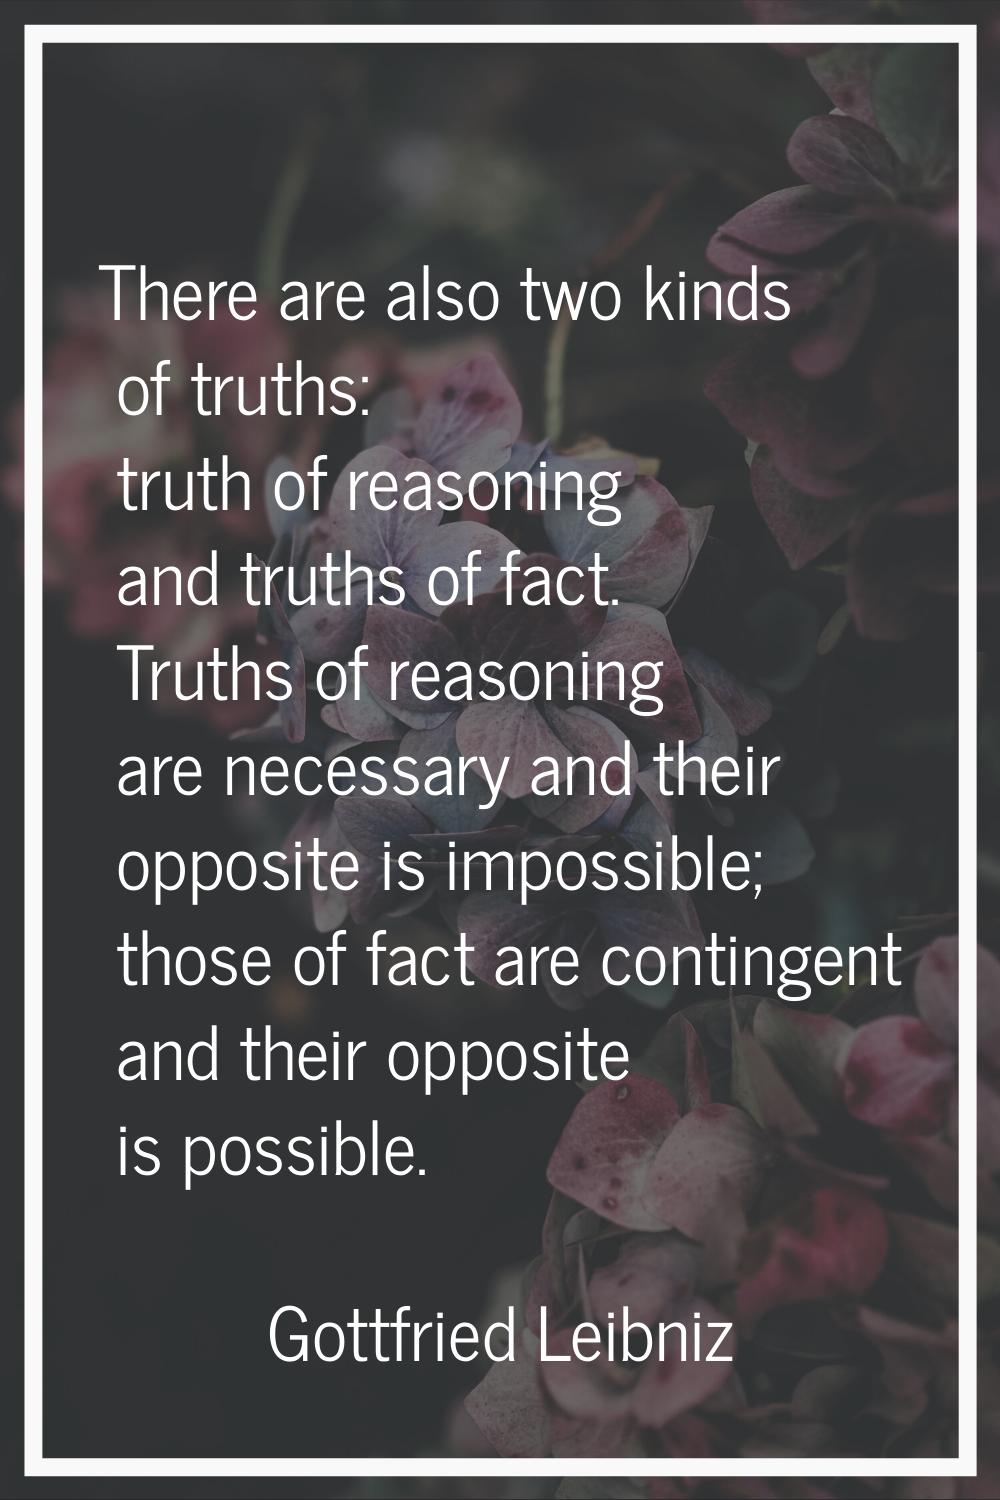 There are also two kinds of truths: truth of reasoning and truths of fact. Truths of reasoning are 